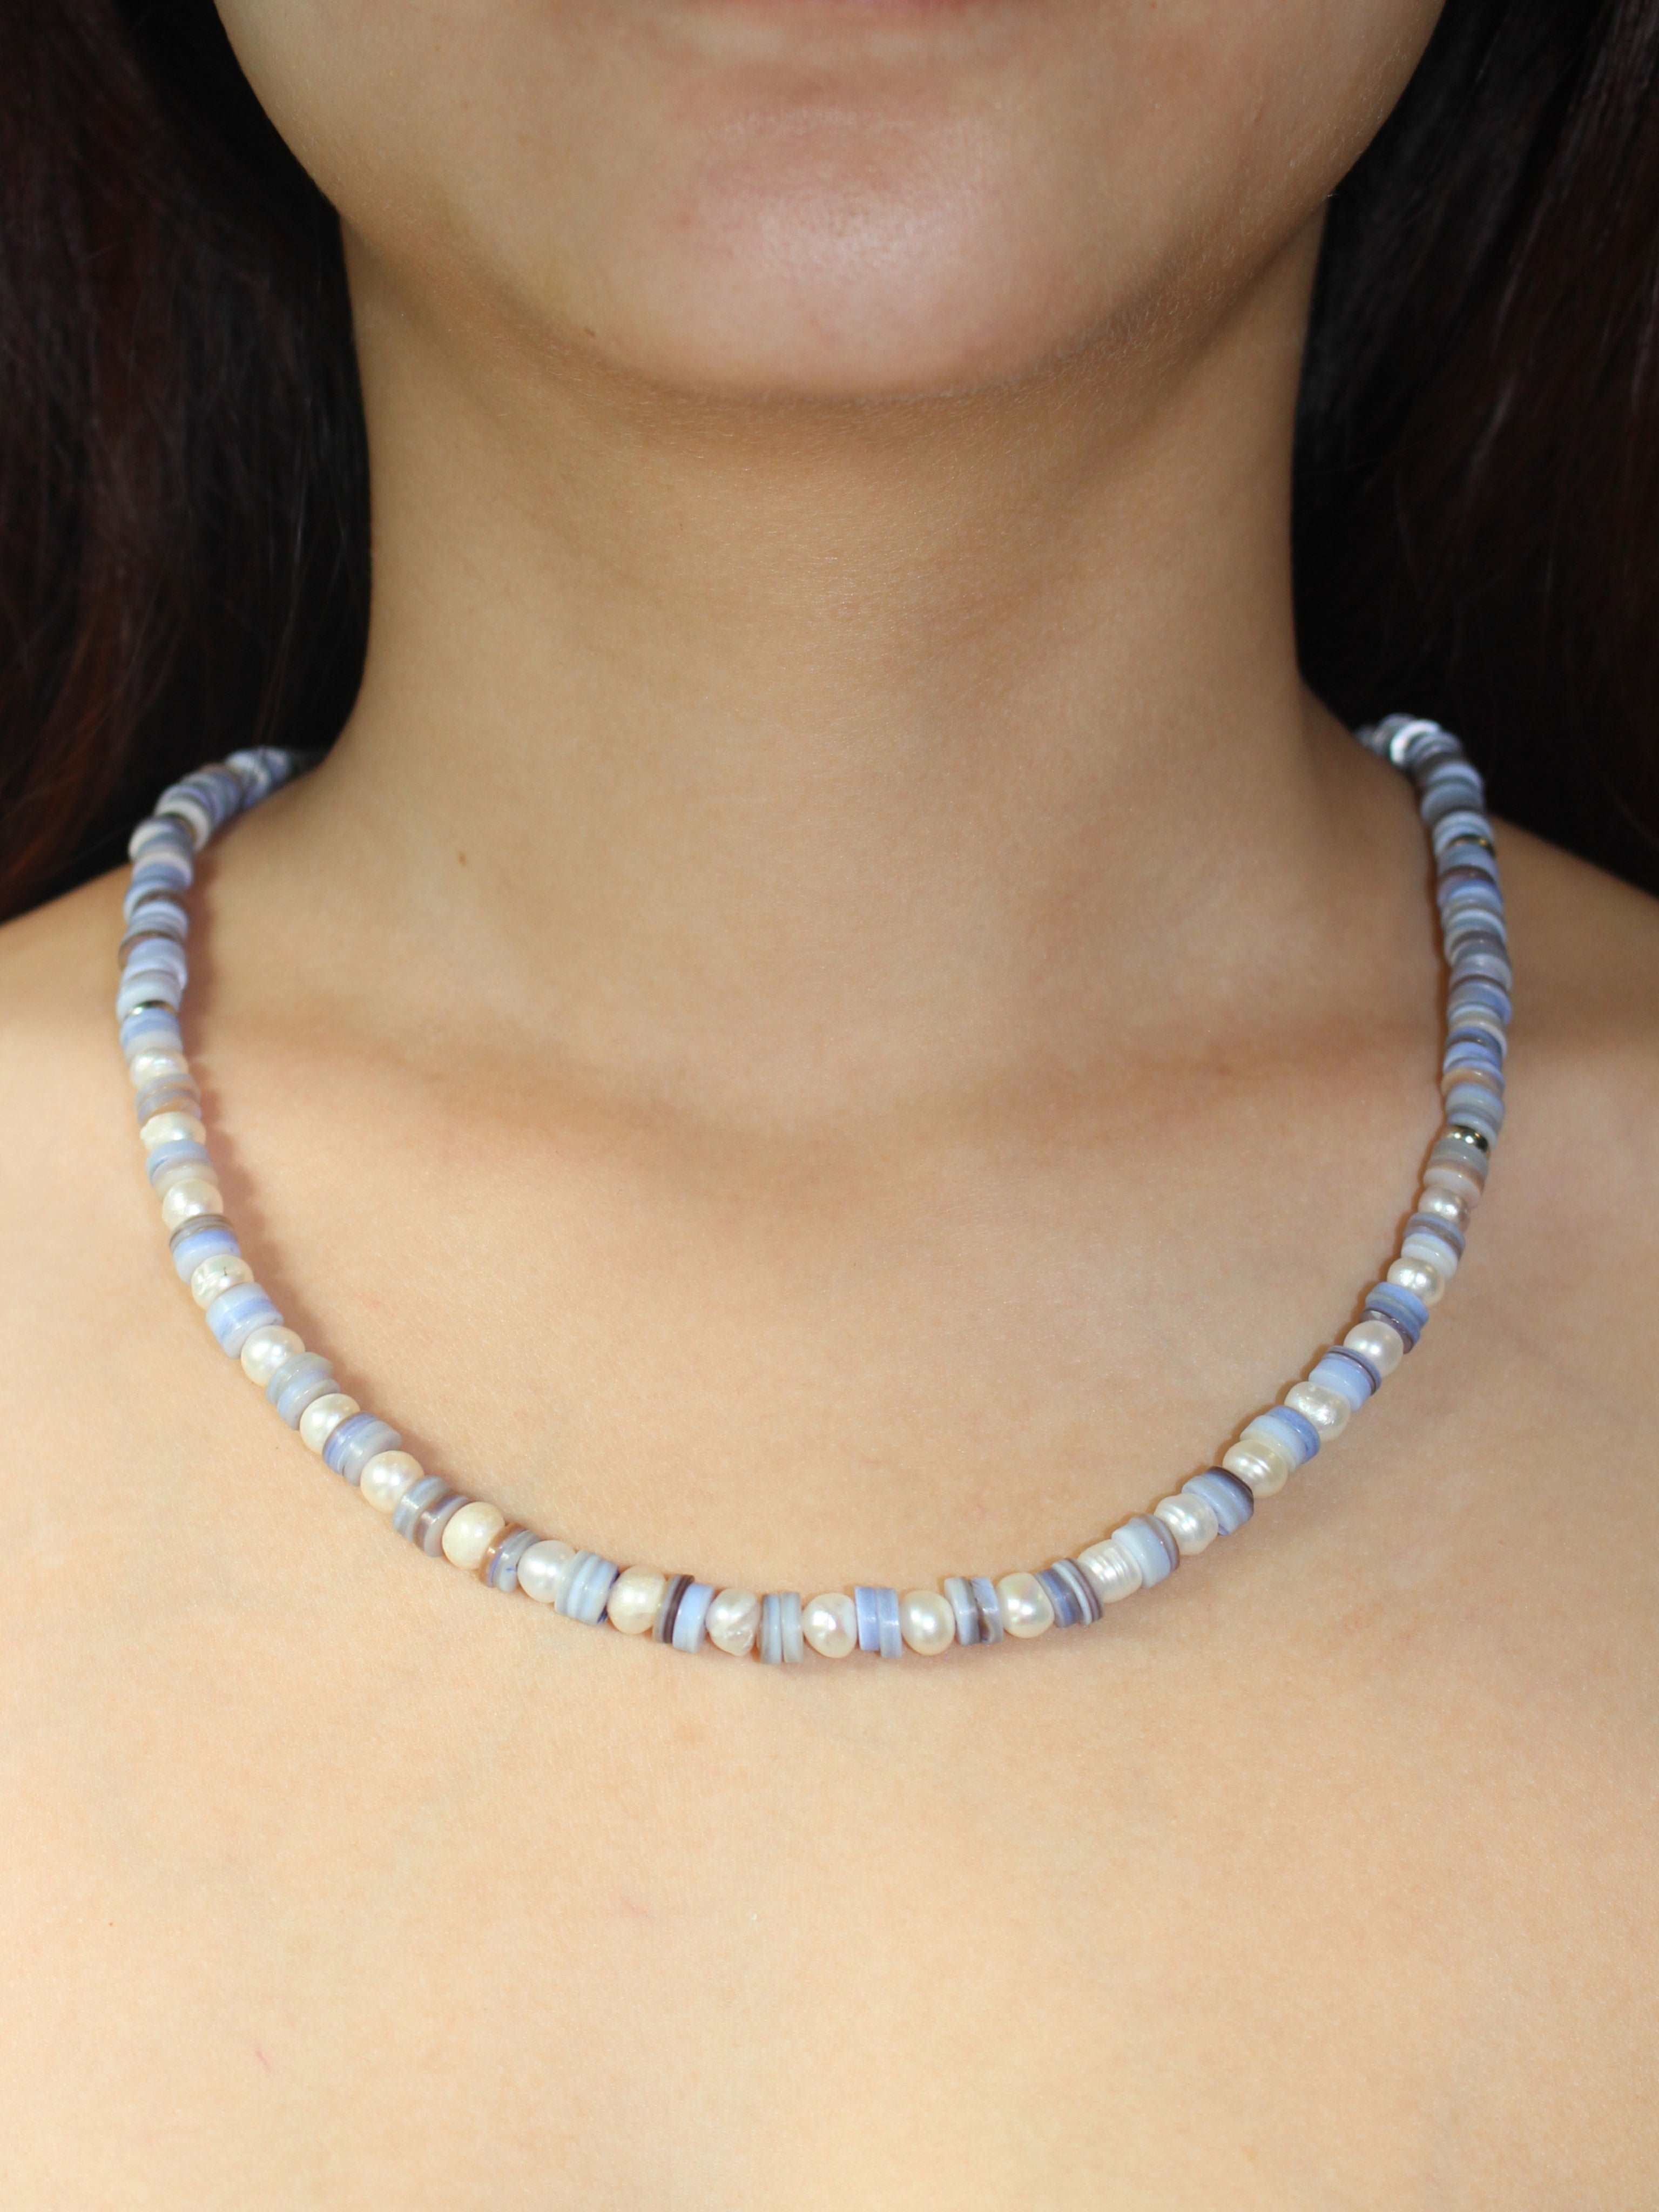 wearing Handmade Mother of Pearl Bead Necklace